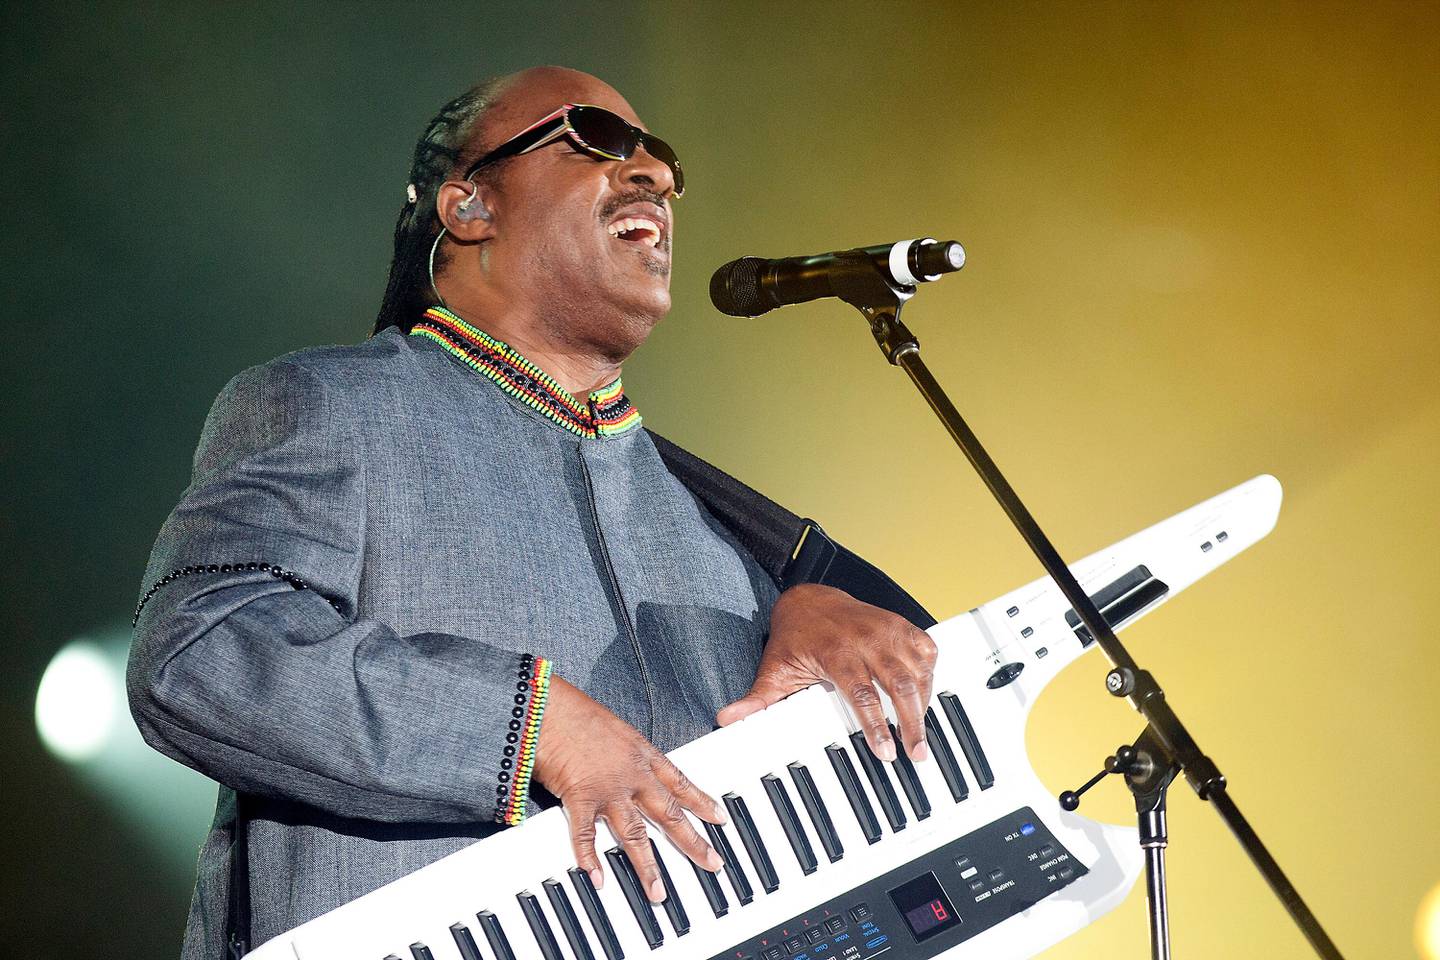 ABU DHABI, UNITED ARAB EMIRATES – March 18, 2011: Stevie Wonder performs at Yas Arena in Abu Dhabi on Friday March 18, 2011.  ( Andrew Henderson / The National )